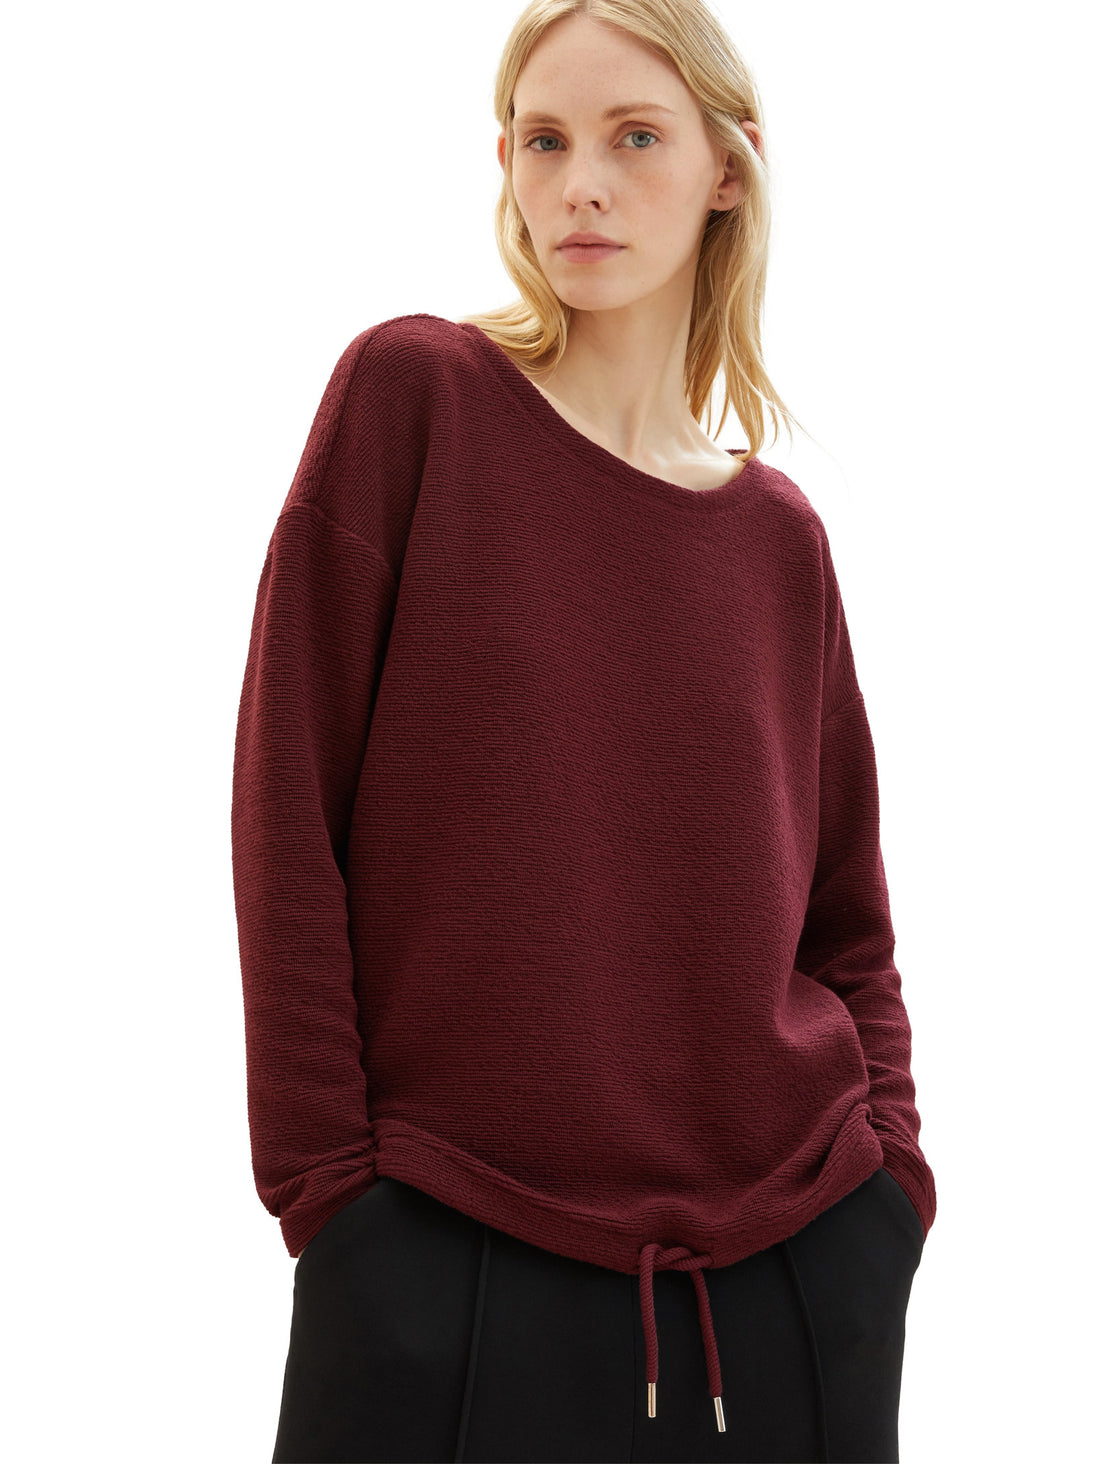 Long Sleeve T Shirt With Wide Round Neckline_1038177_10308_02